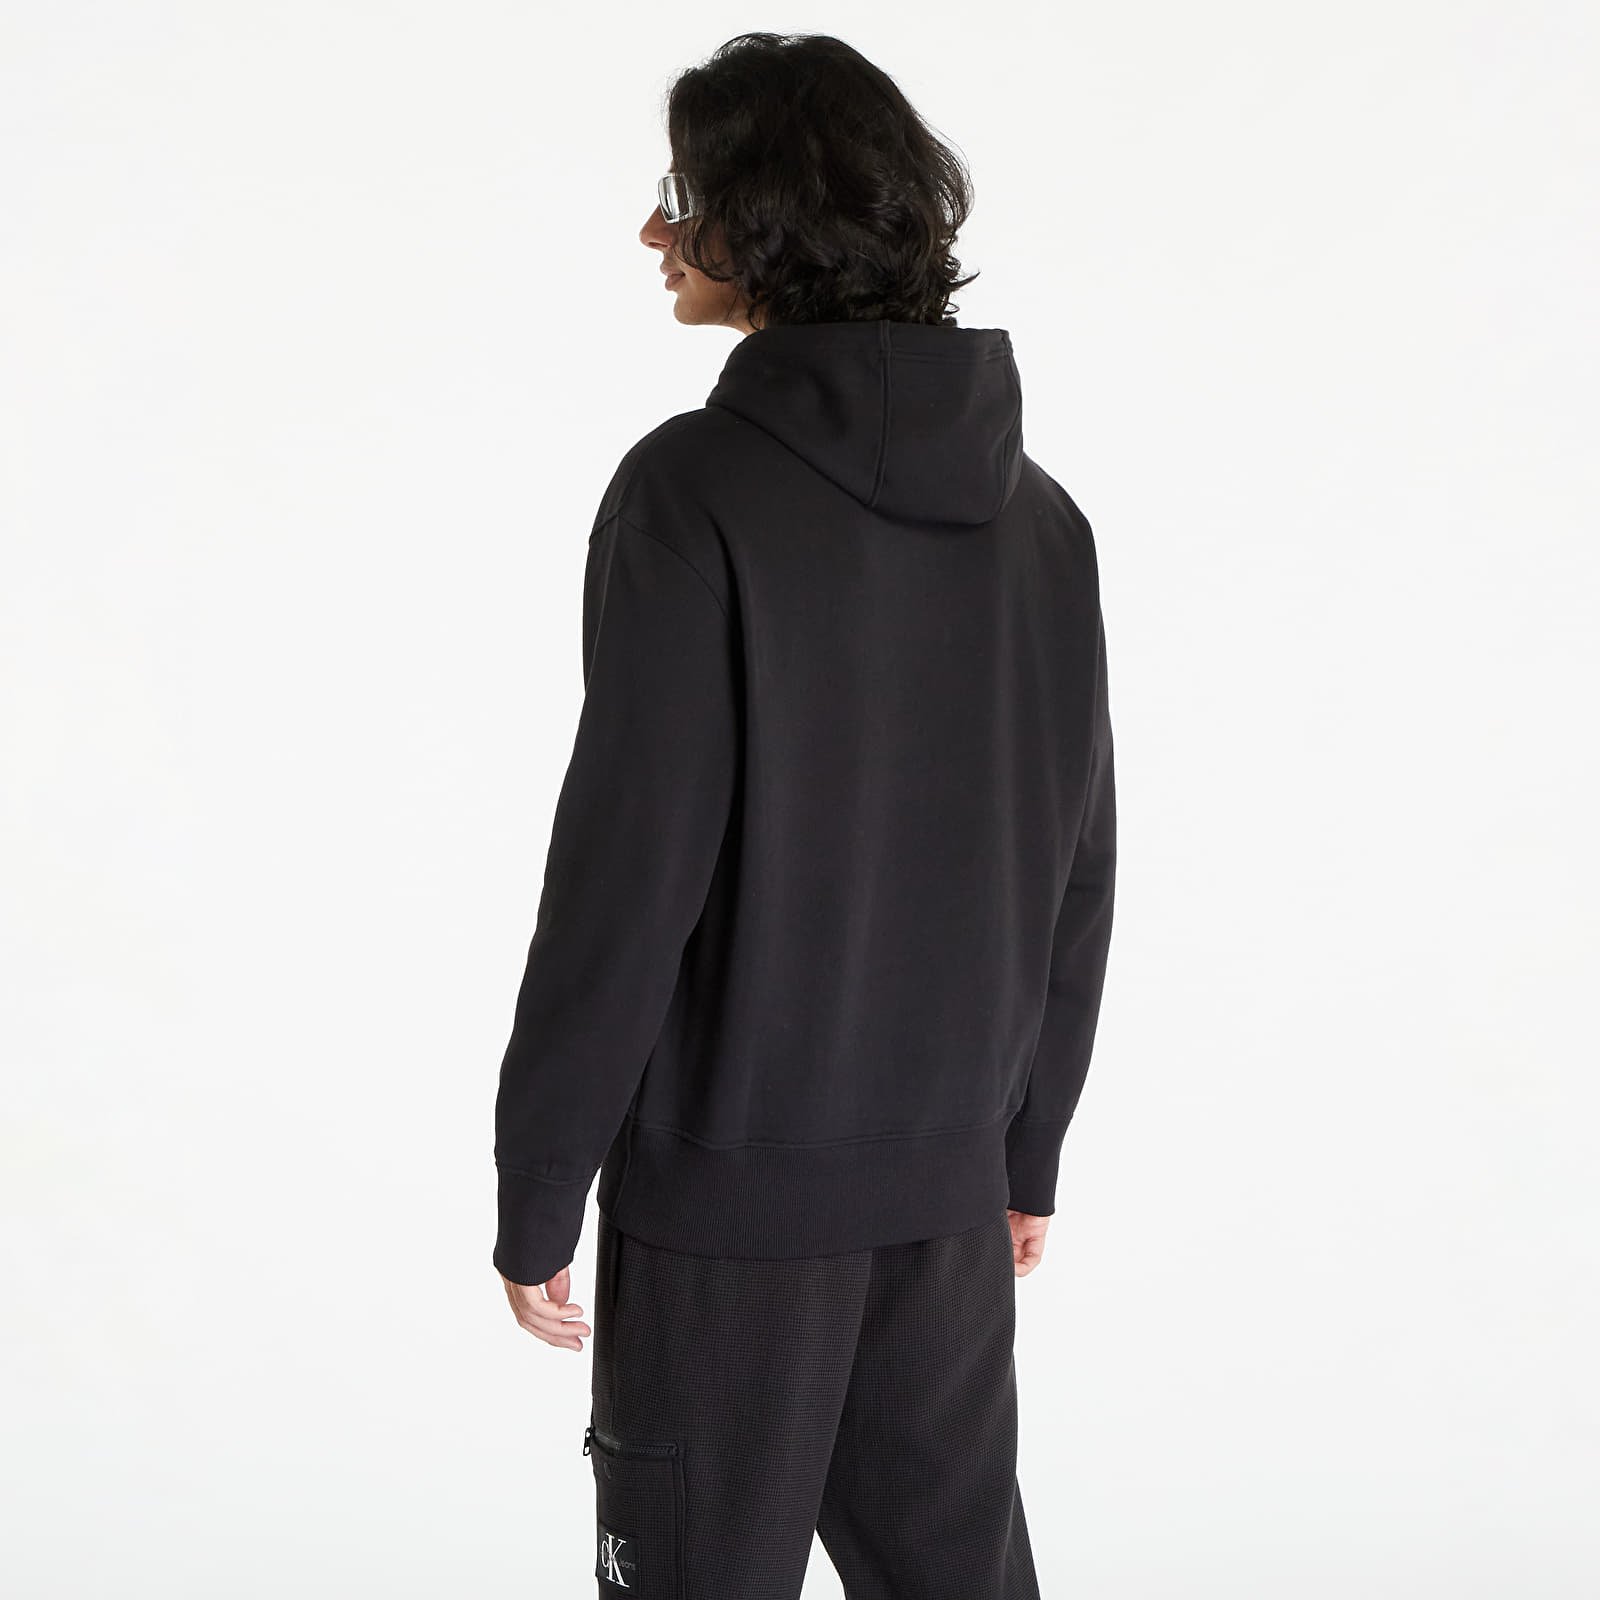 Connected Layer Land Hoodie